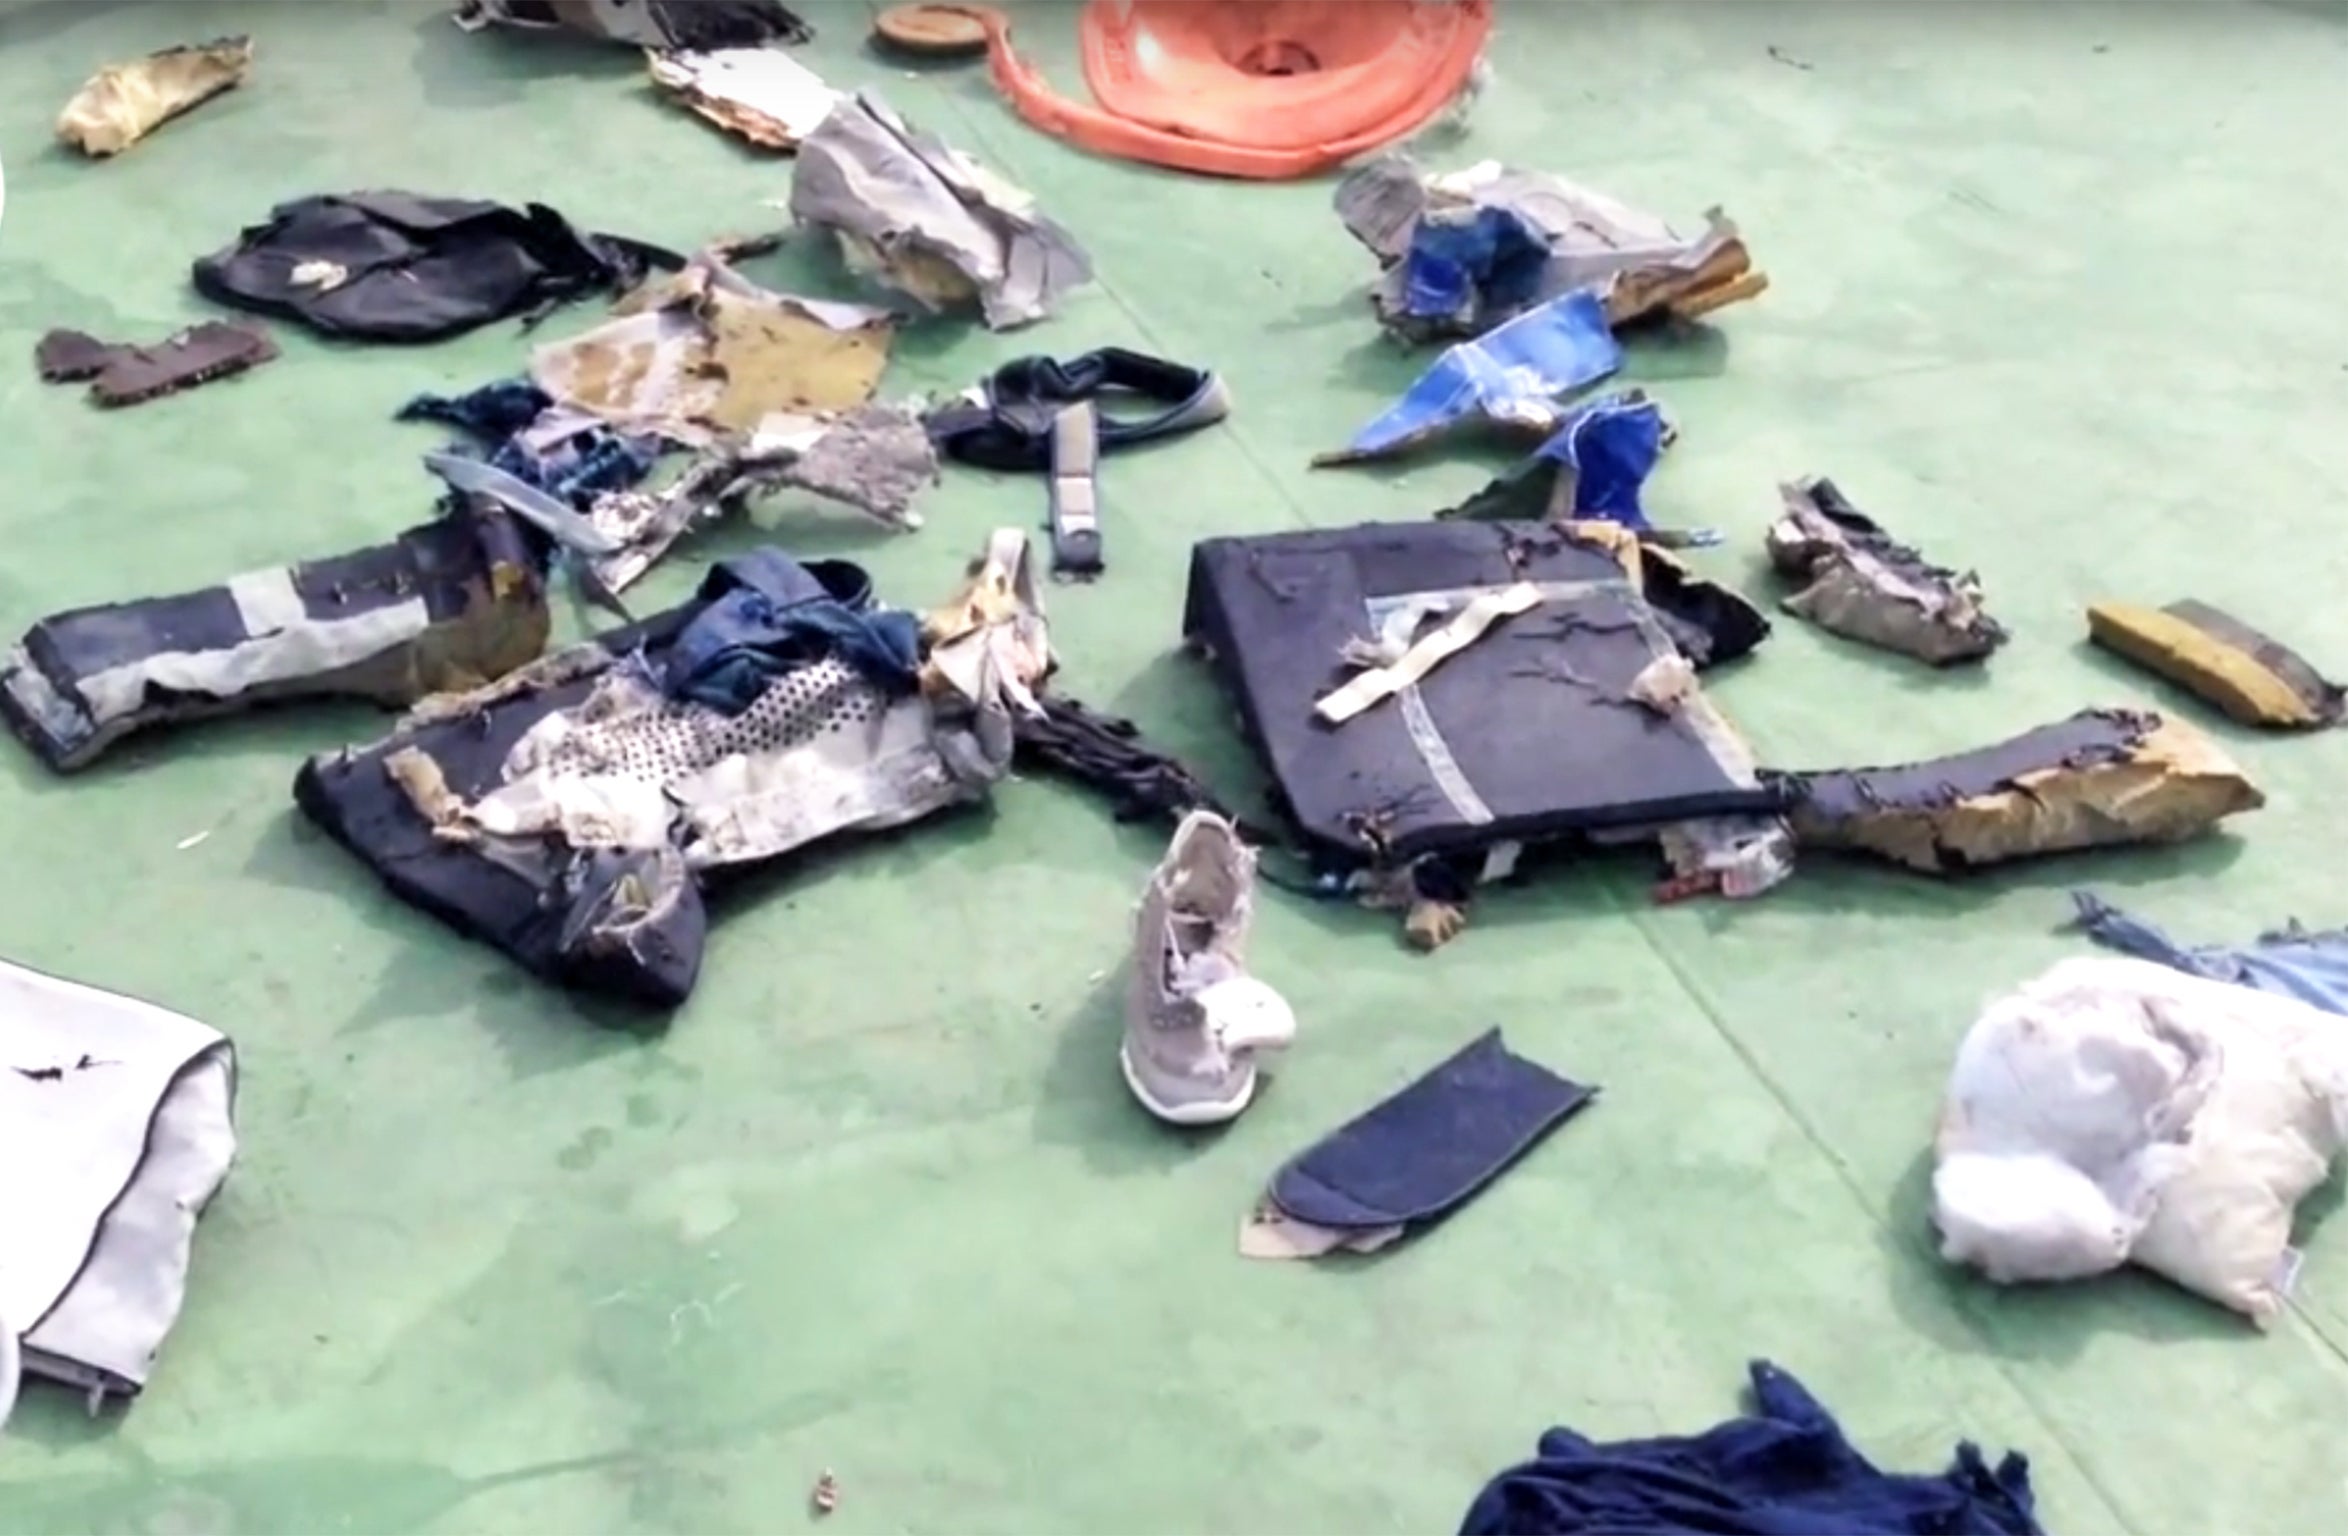 Personal belongings and other wreckage from EgyptAir flight 804